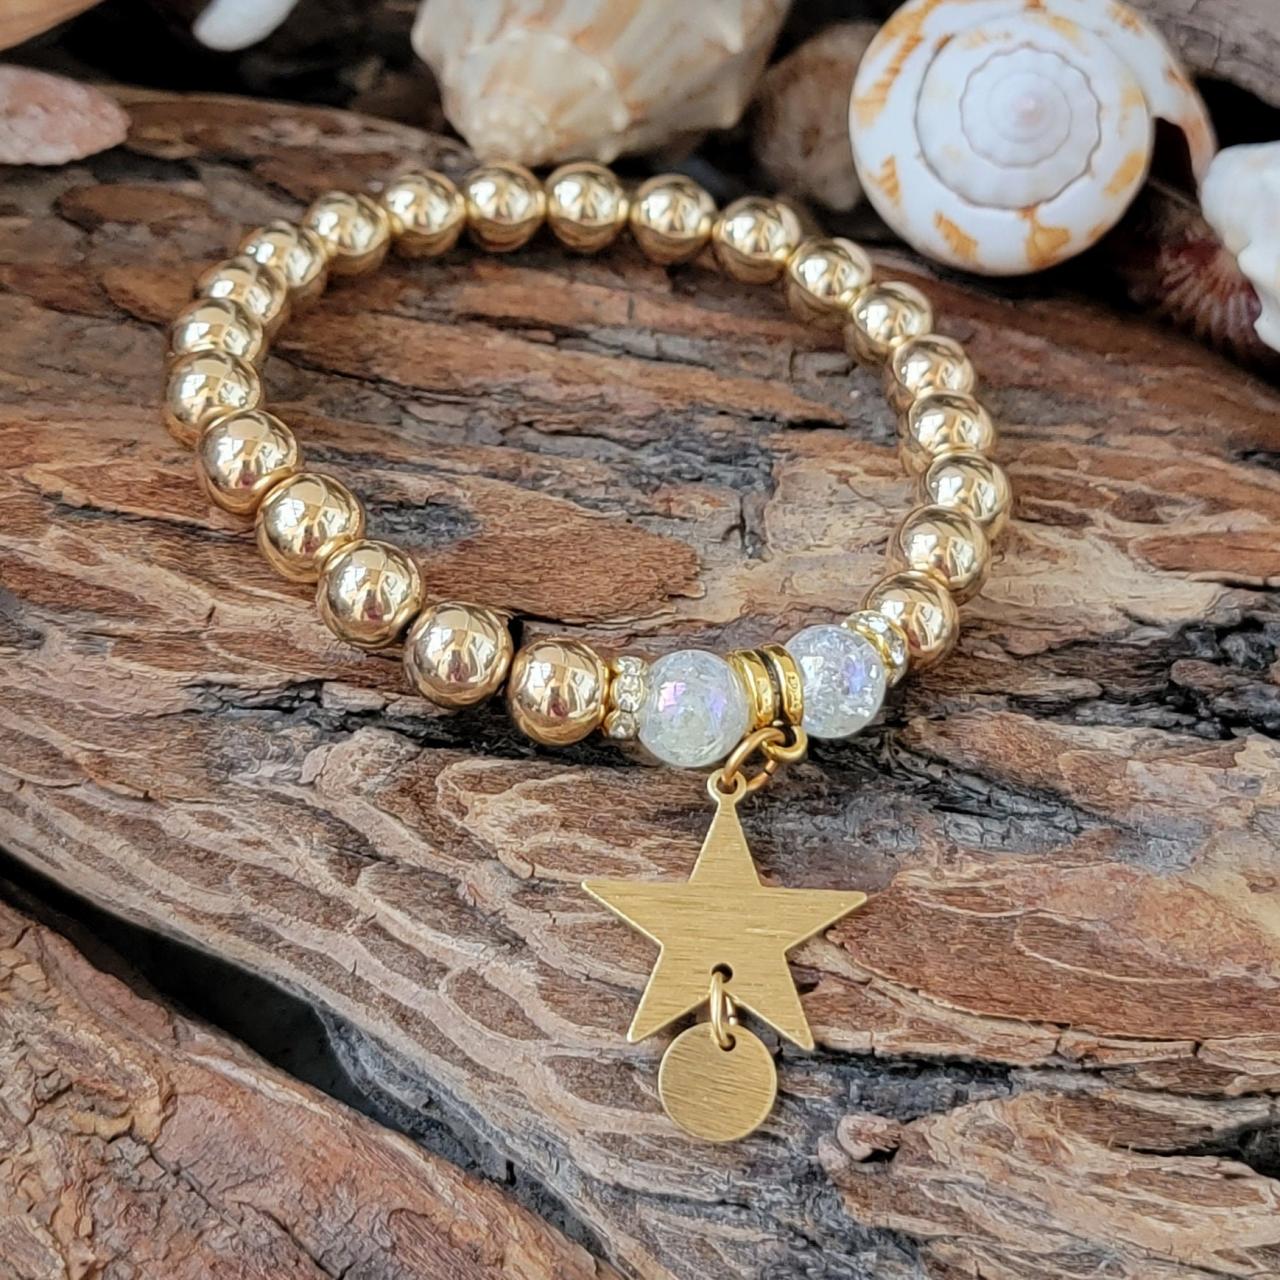 Rainbow Crystal Crackle Quartz Natural Healing Gemstone Bracelet With Swarovski Crystals, Gold Plated Beads And Star Charm